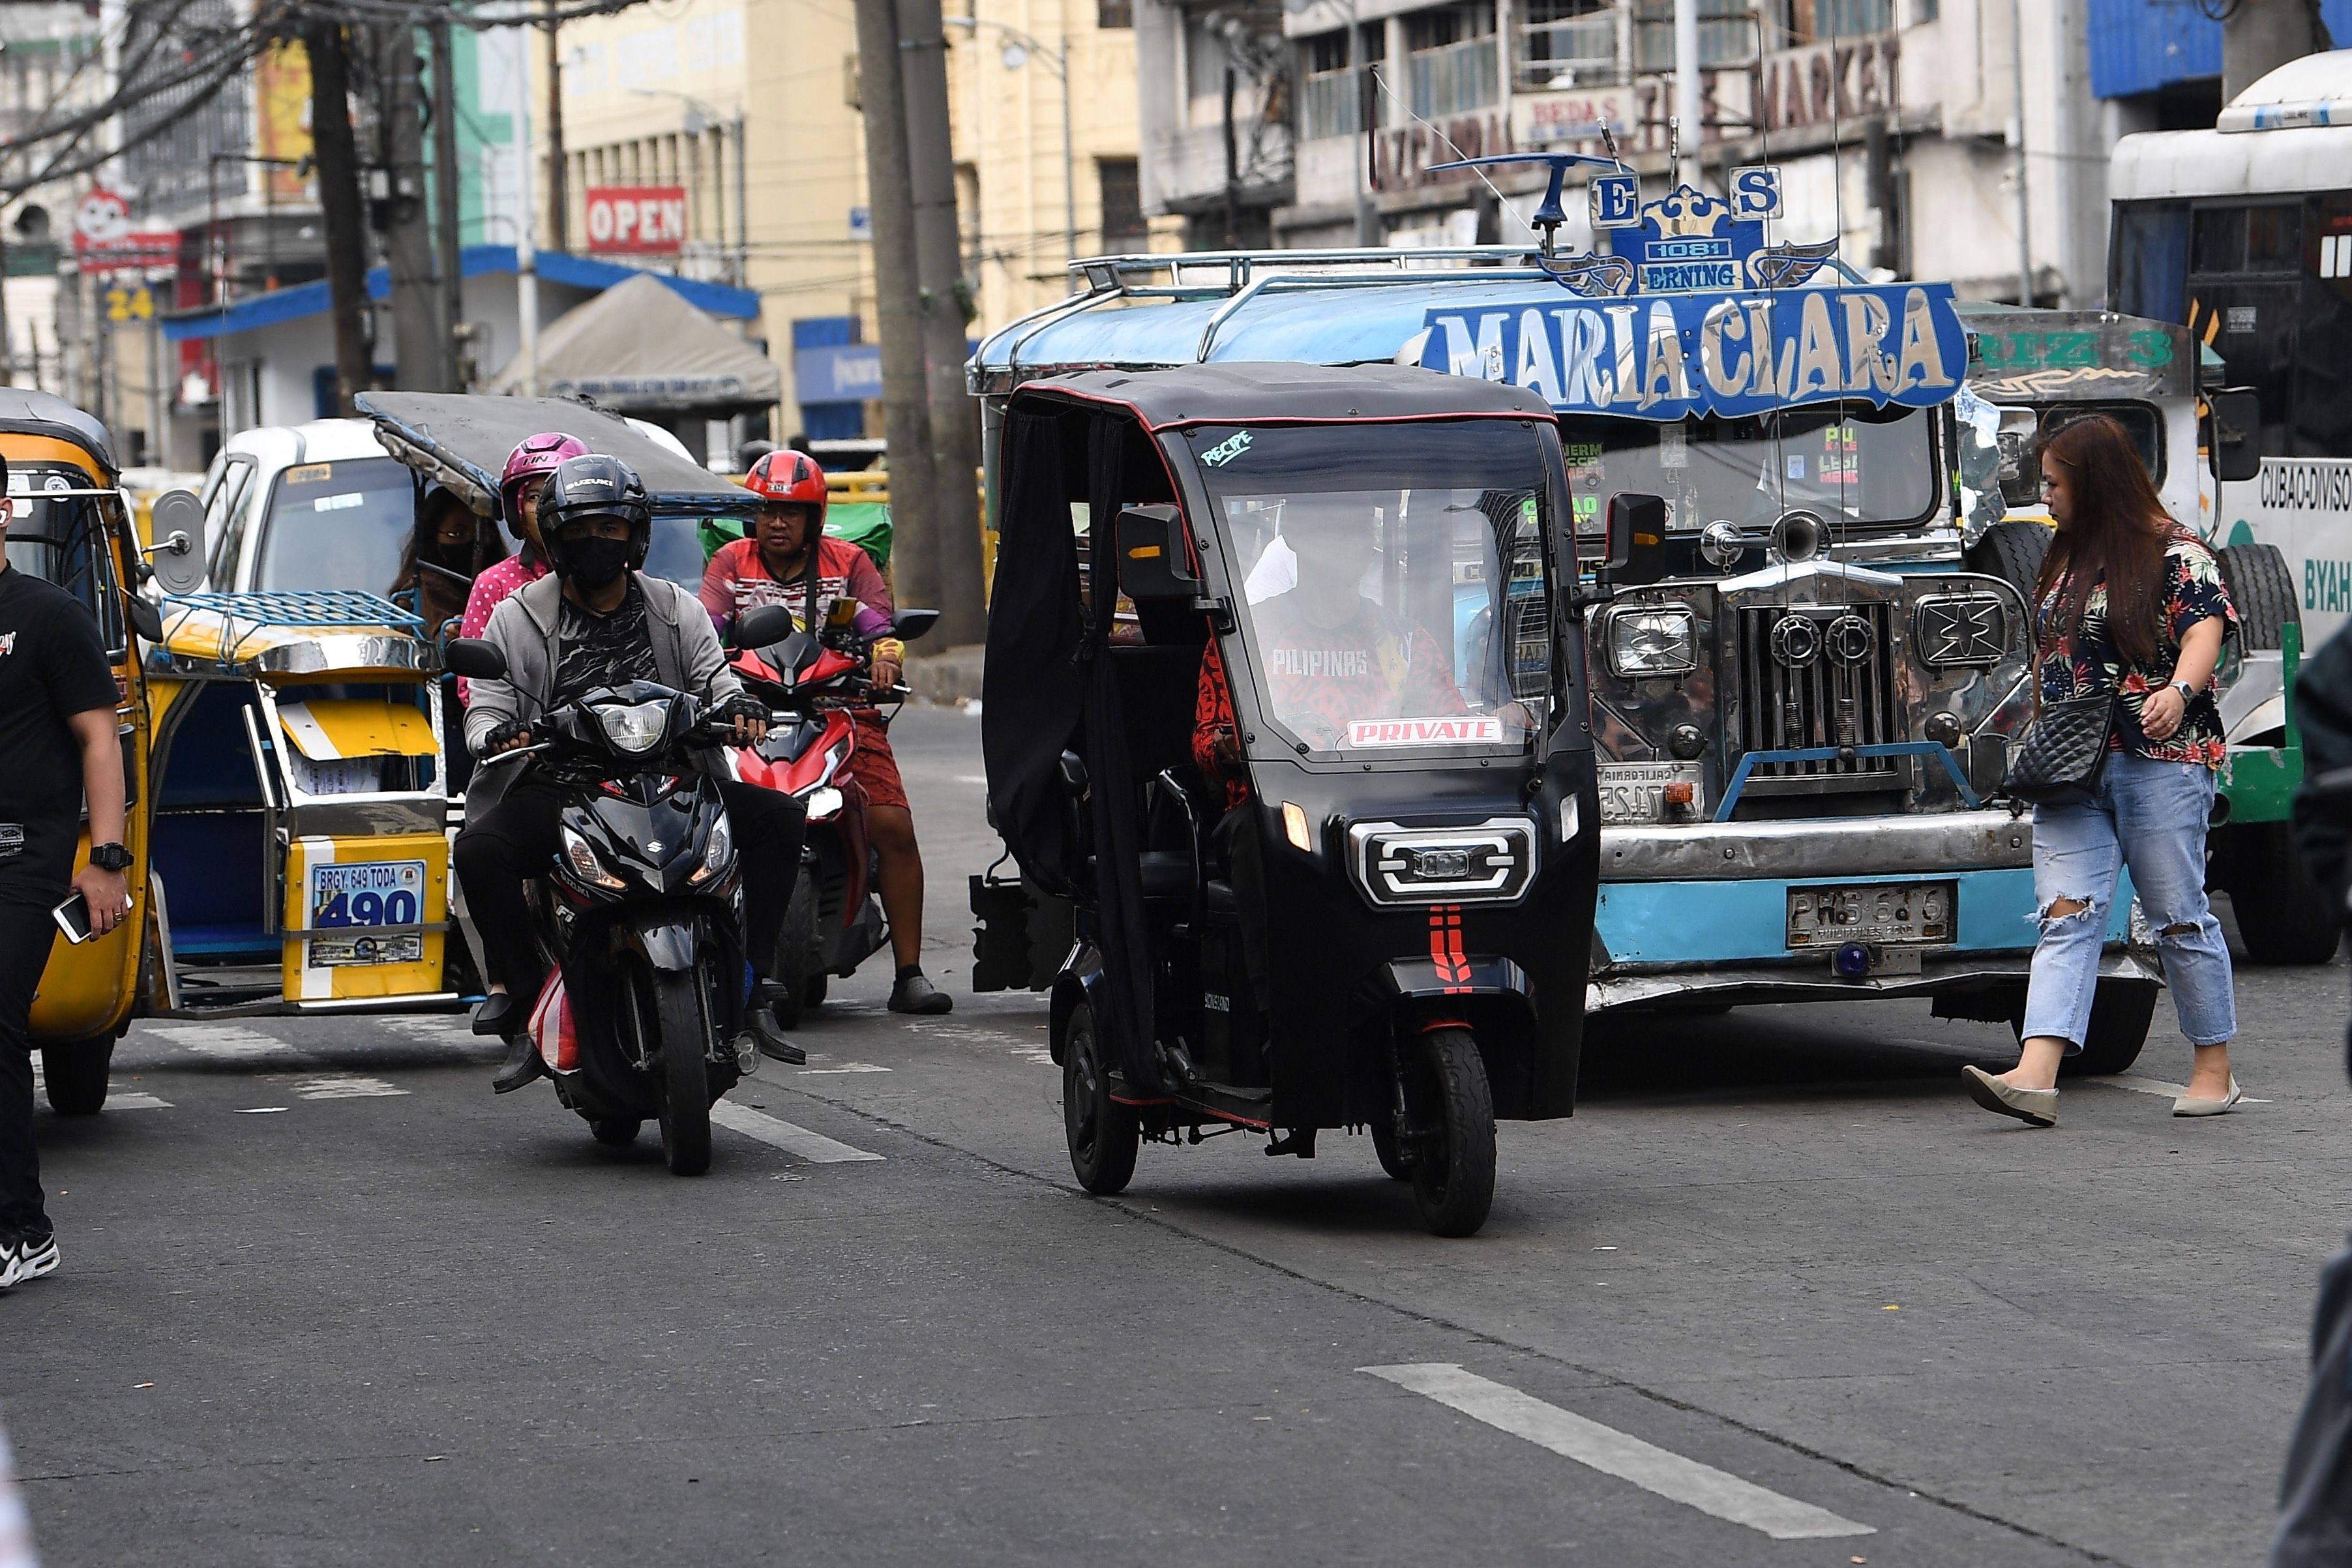 An electric tricycle traverses a street in Manila. There were 44,493 vehicular accidents in Metro Manila from January to July last year, 44,000 of which involved four-wheel vehicles. Photo: AFP